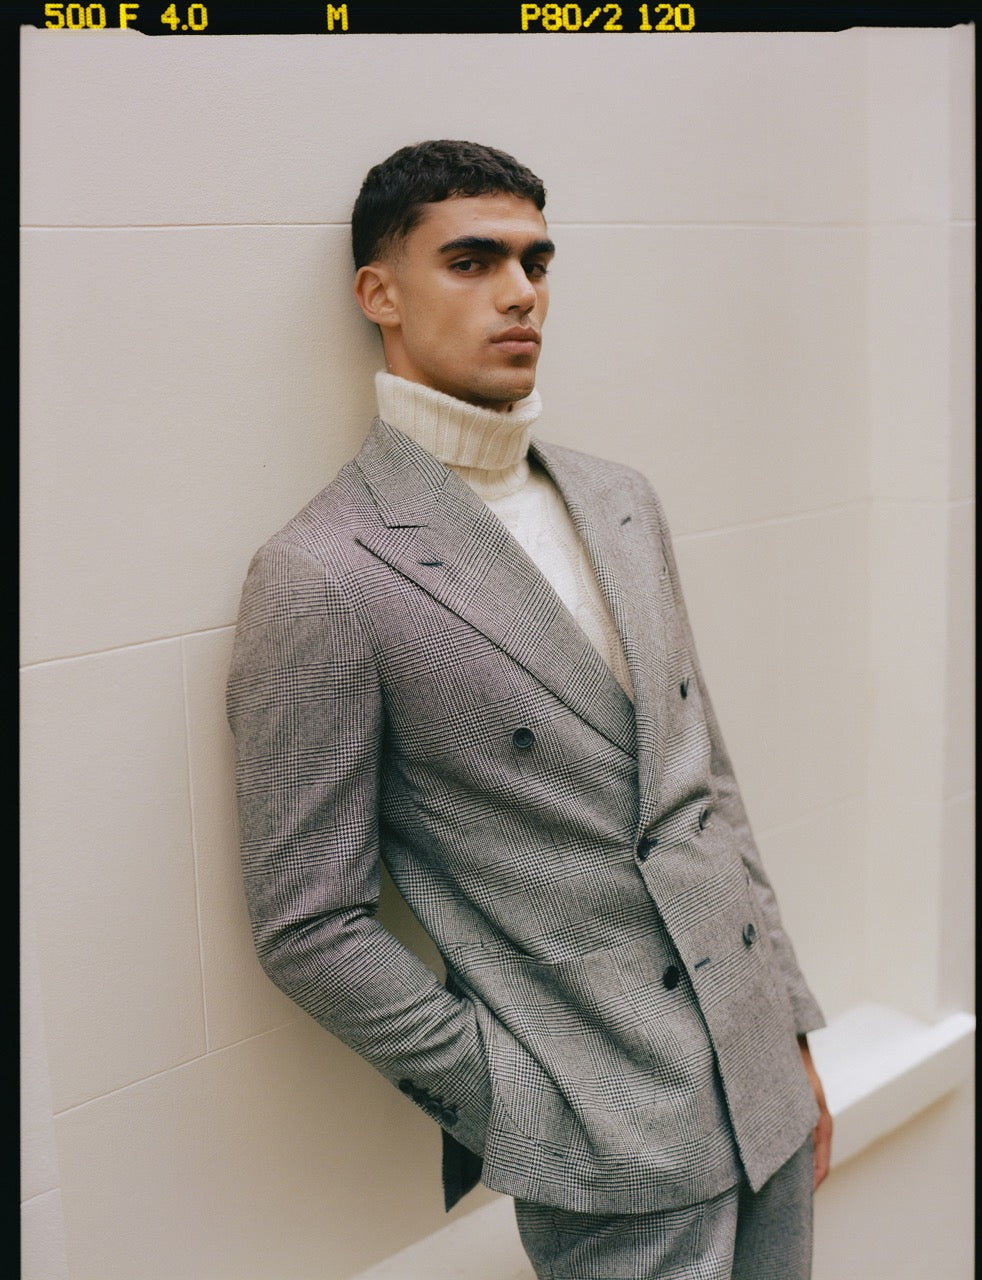 Wool Double Breasted Patch Pocket Suit Black And White Campaign Image